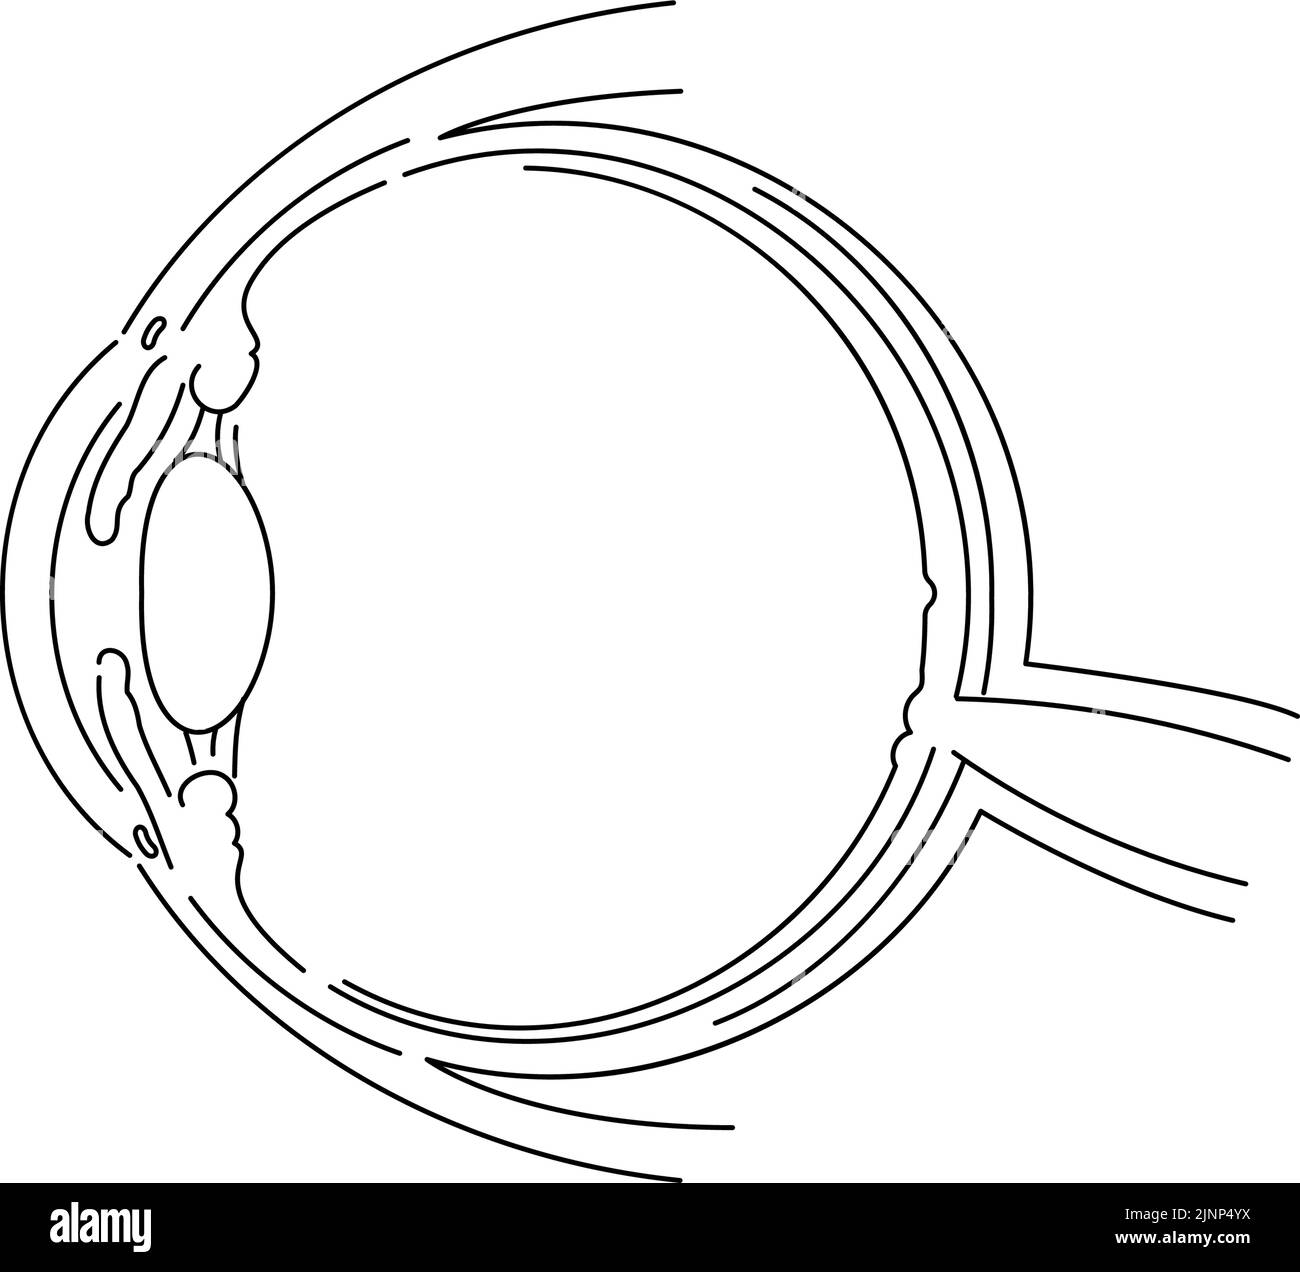 Diagrammatic illustration of the eye (line drawing) Stock Vector